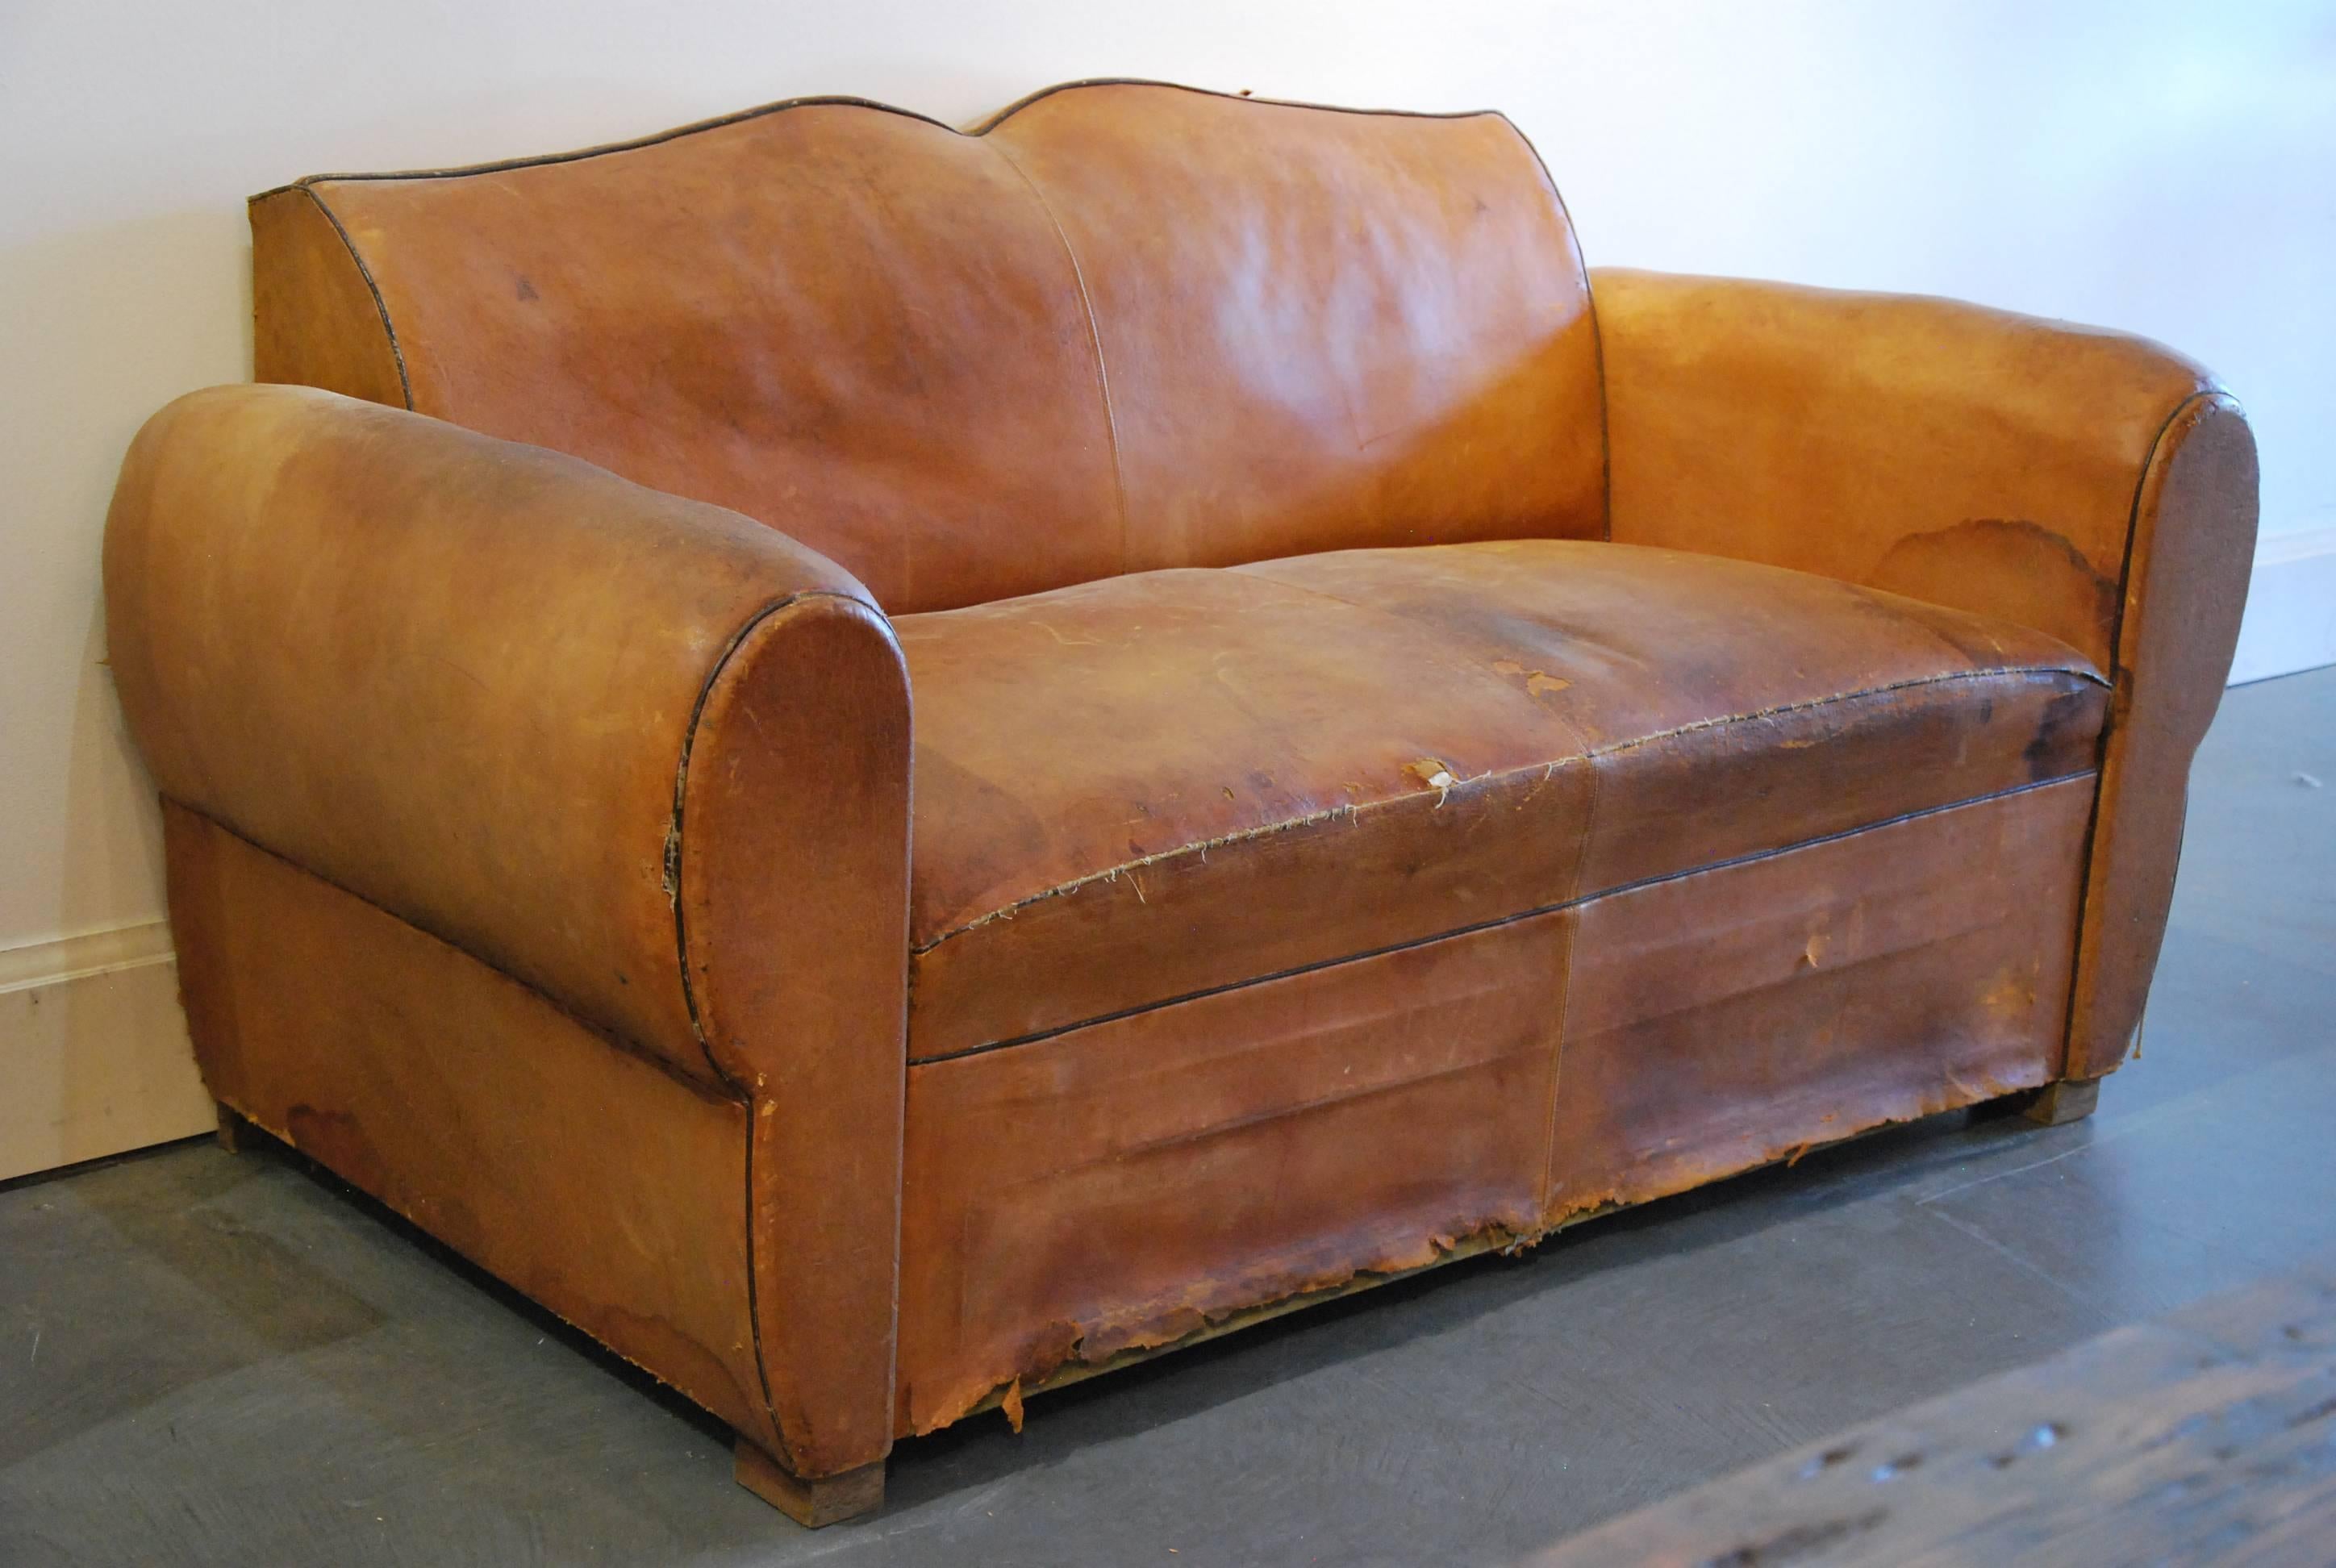 Unusual rare small sofa from France. This set is as found and may require a little love. Structure is heavy has been reinforced and very sound.
Leather is original showing age and minor tears.